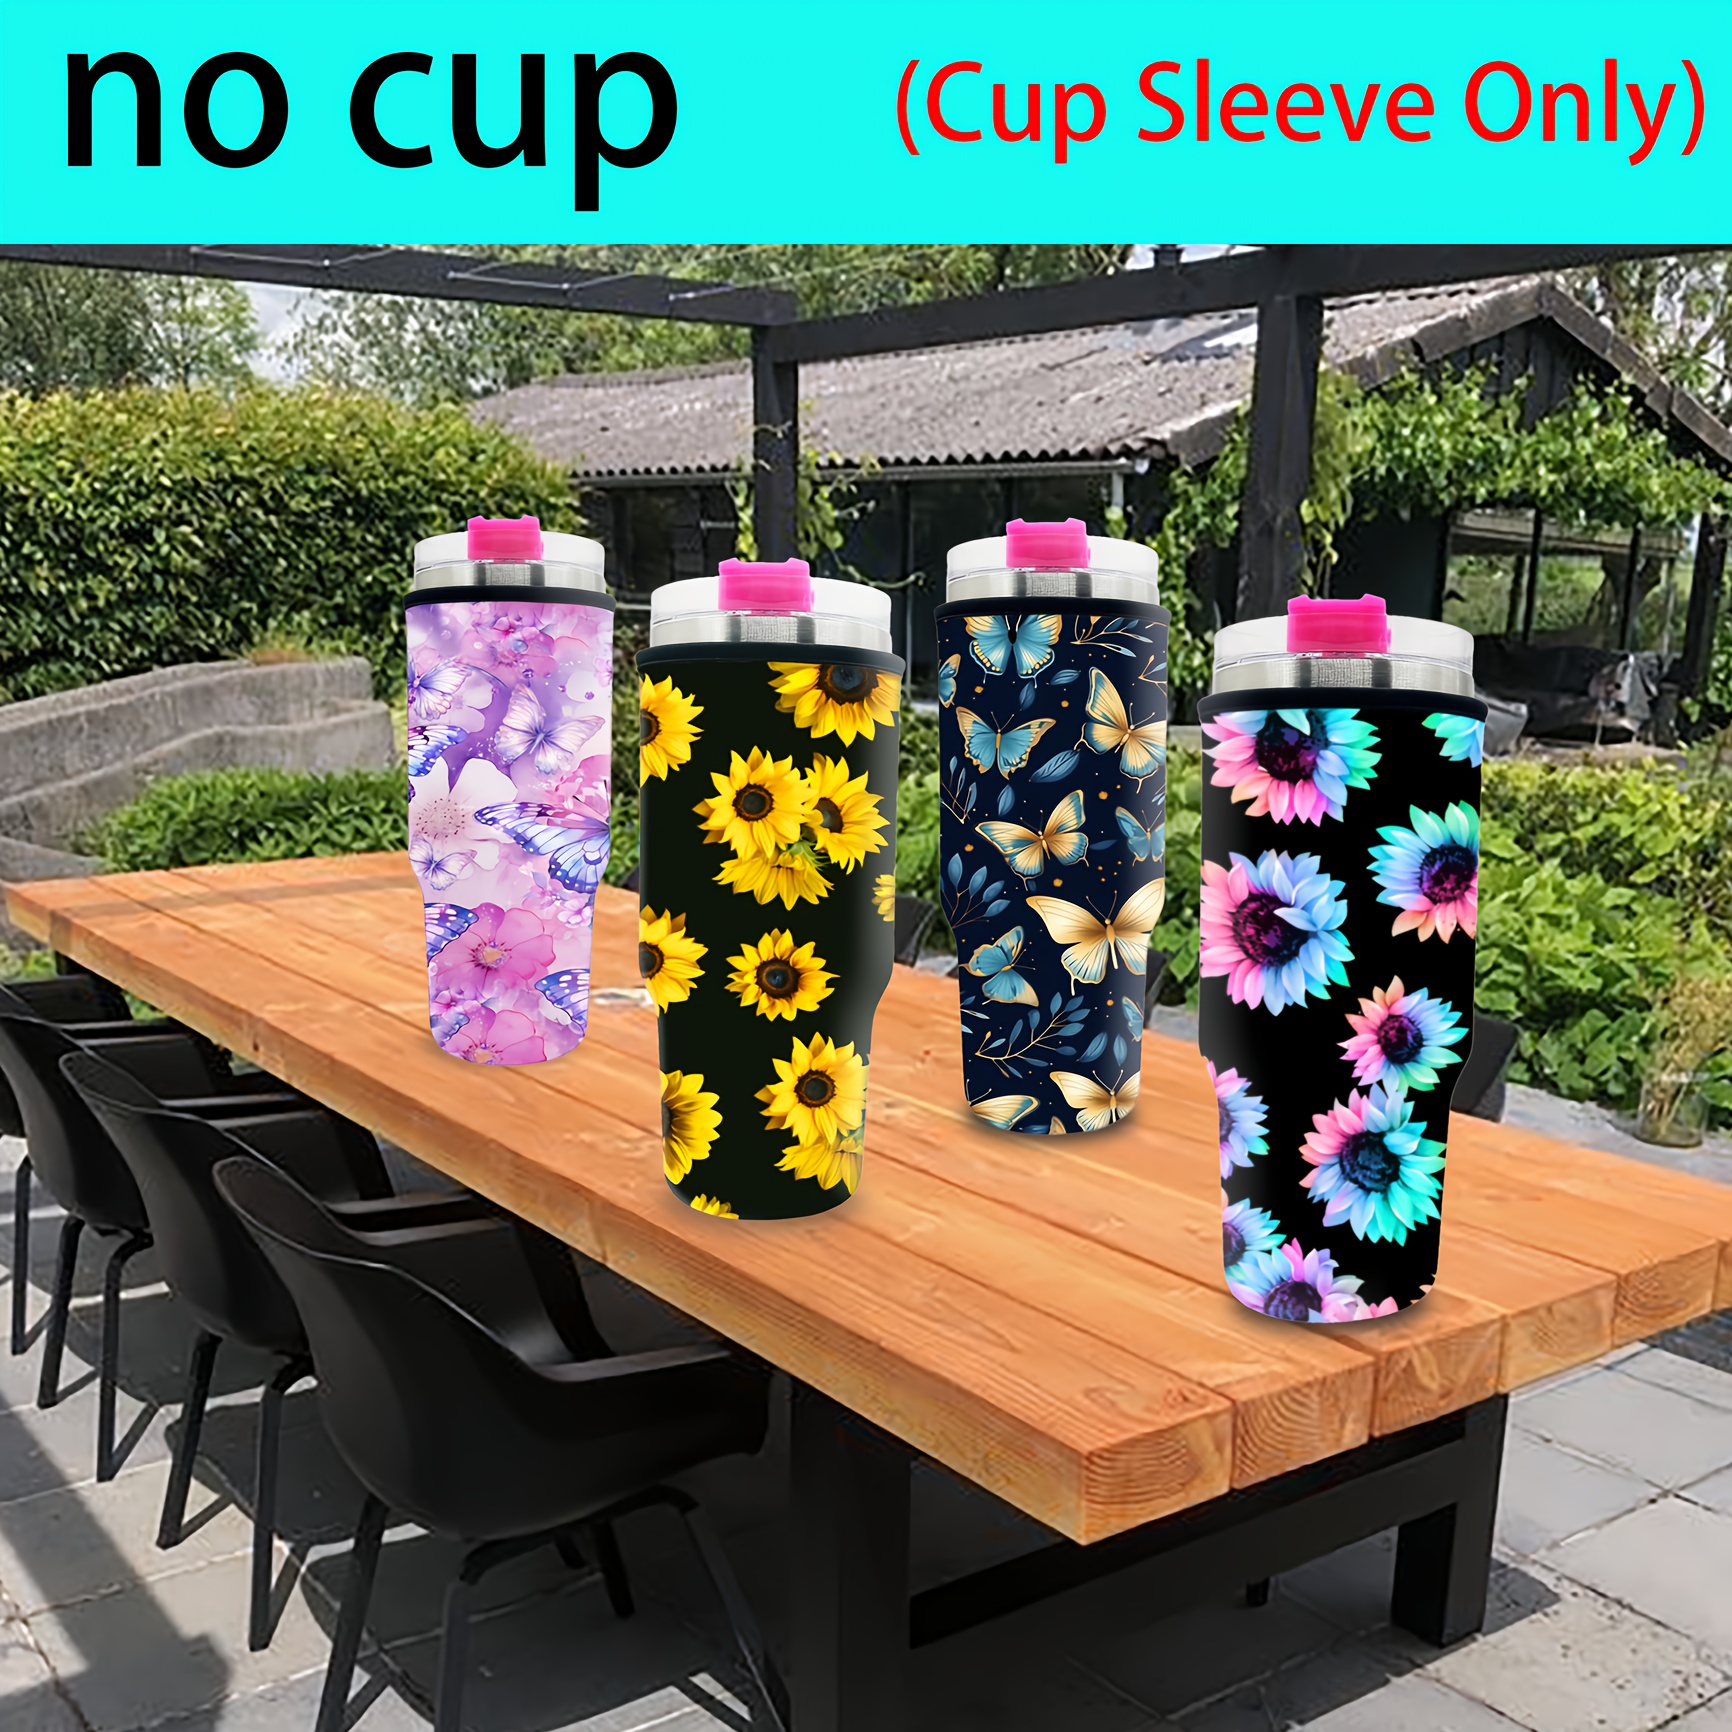 

1pc Neoprene Cup Sleeve, Colorful Sunflower & Butterfly Digital Print, Fits Stanley 40oz Tumbler (1200ml), Insulated Drink Holder, Gift Item (cup Sleeve Only)